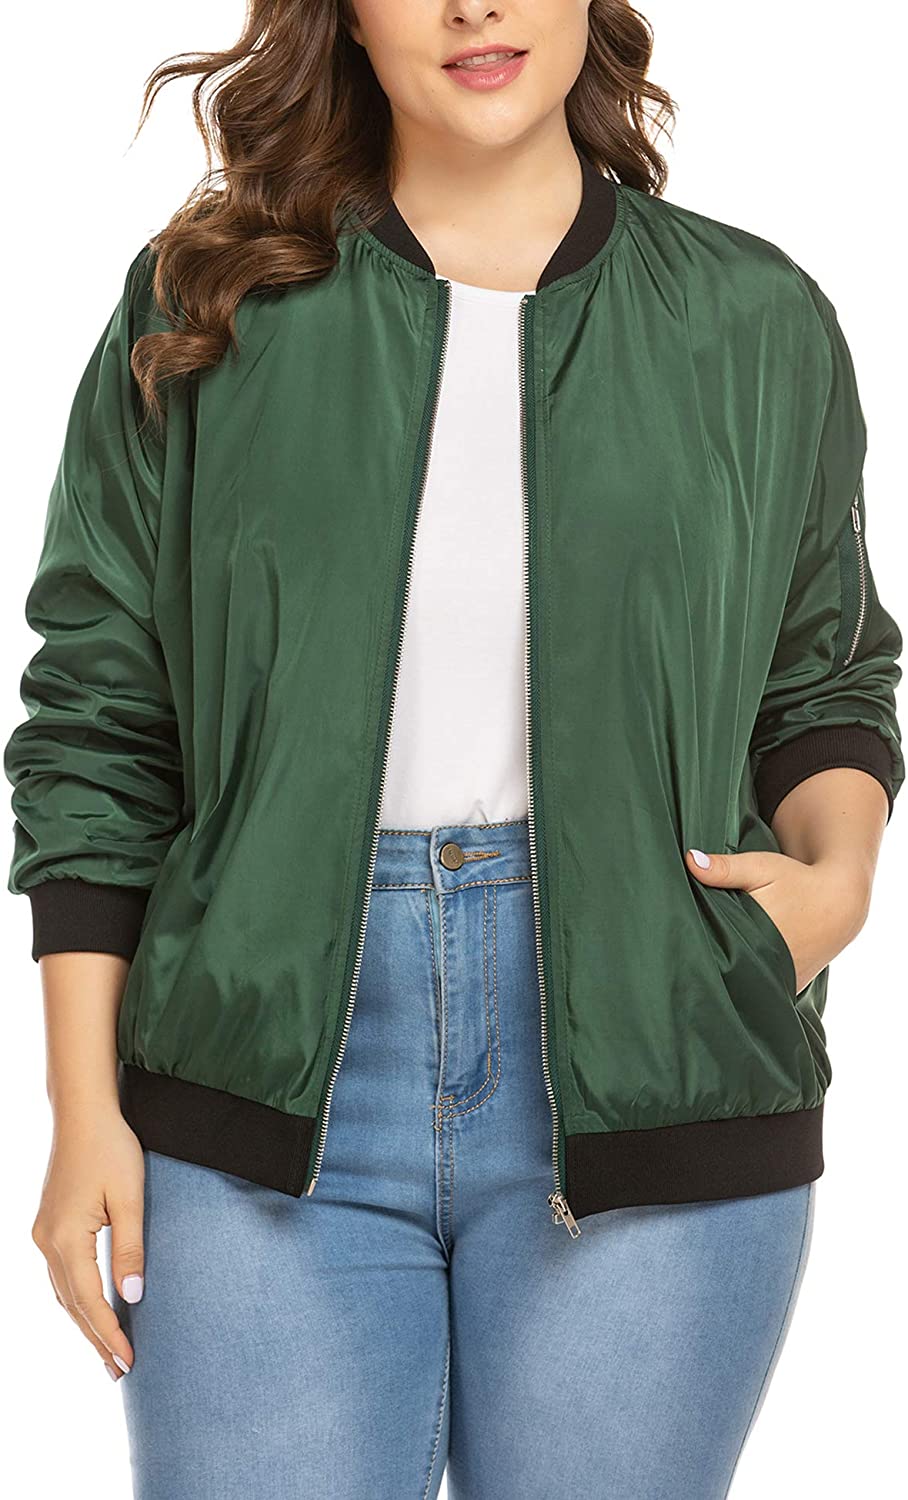 INVOLAND Womens Jacket Plus Size Bomber Jackets Lightweight with Pockets Zip Up Quilted Casual Coat Outwear